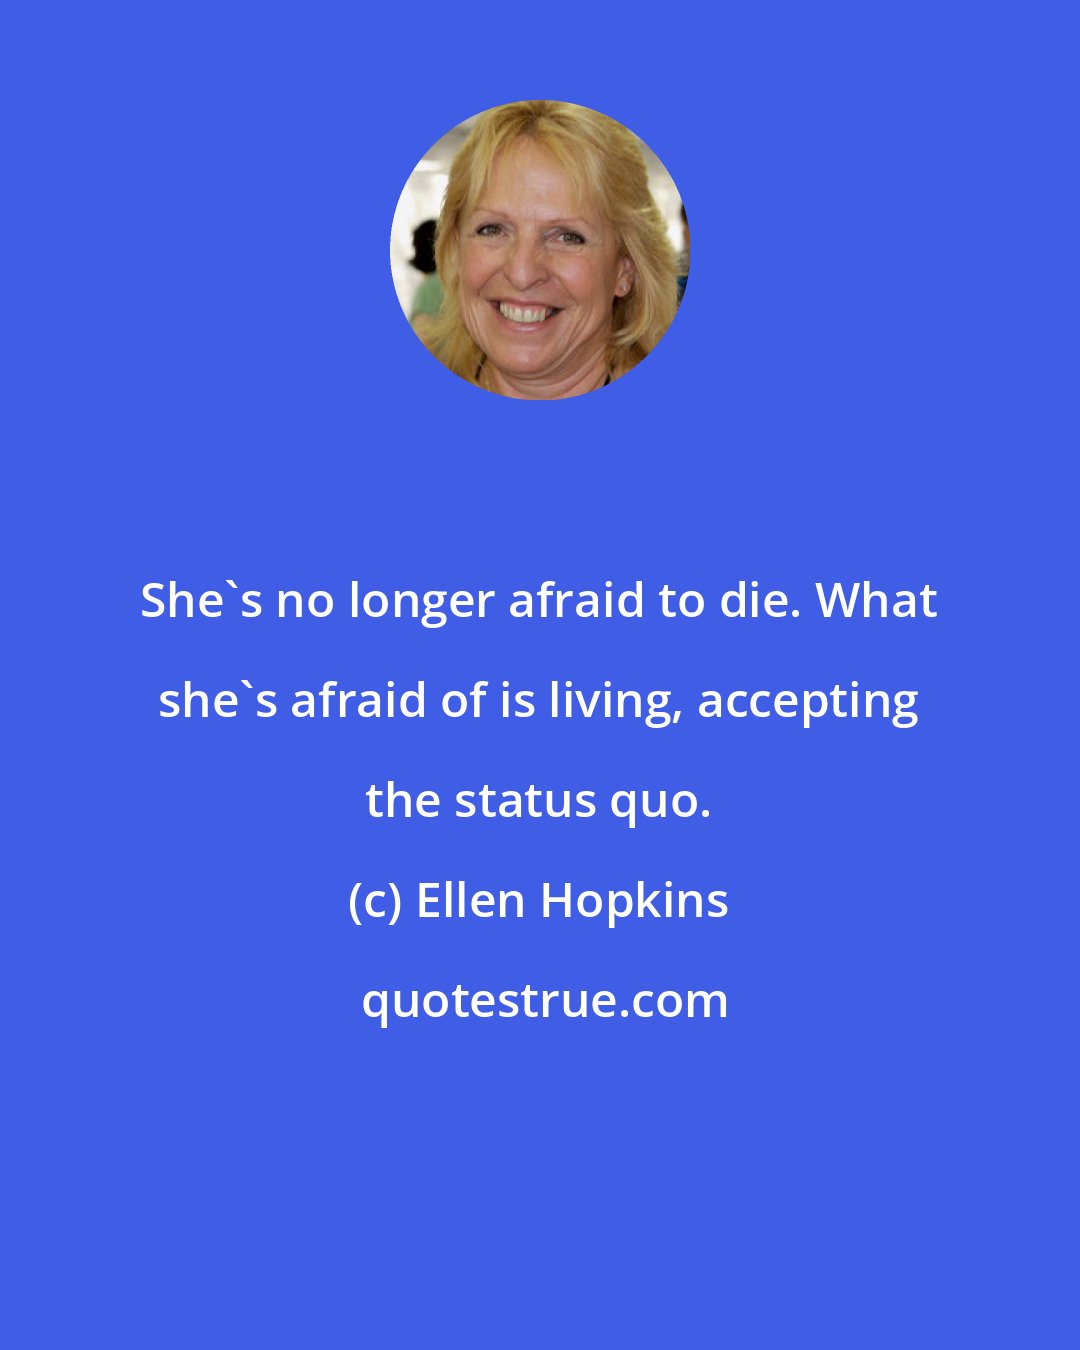 Ellen Hopkins: She's no longer afraid to die. What she's afraid of is living, accepting the status quo.